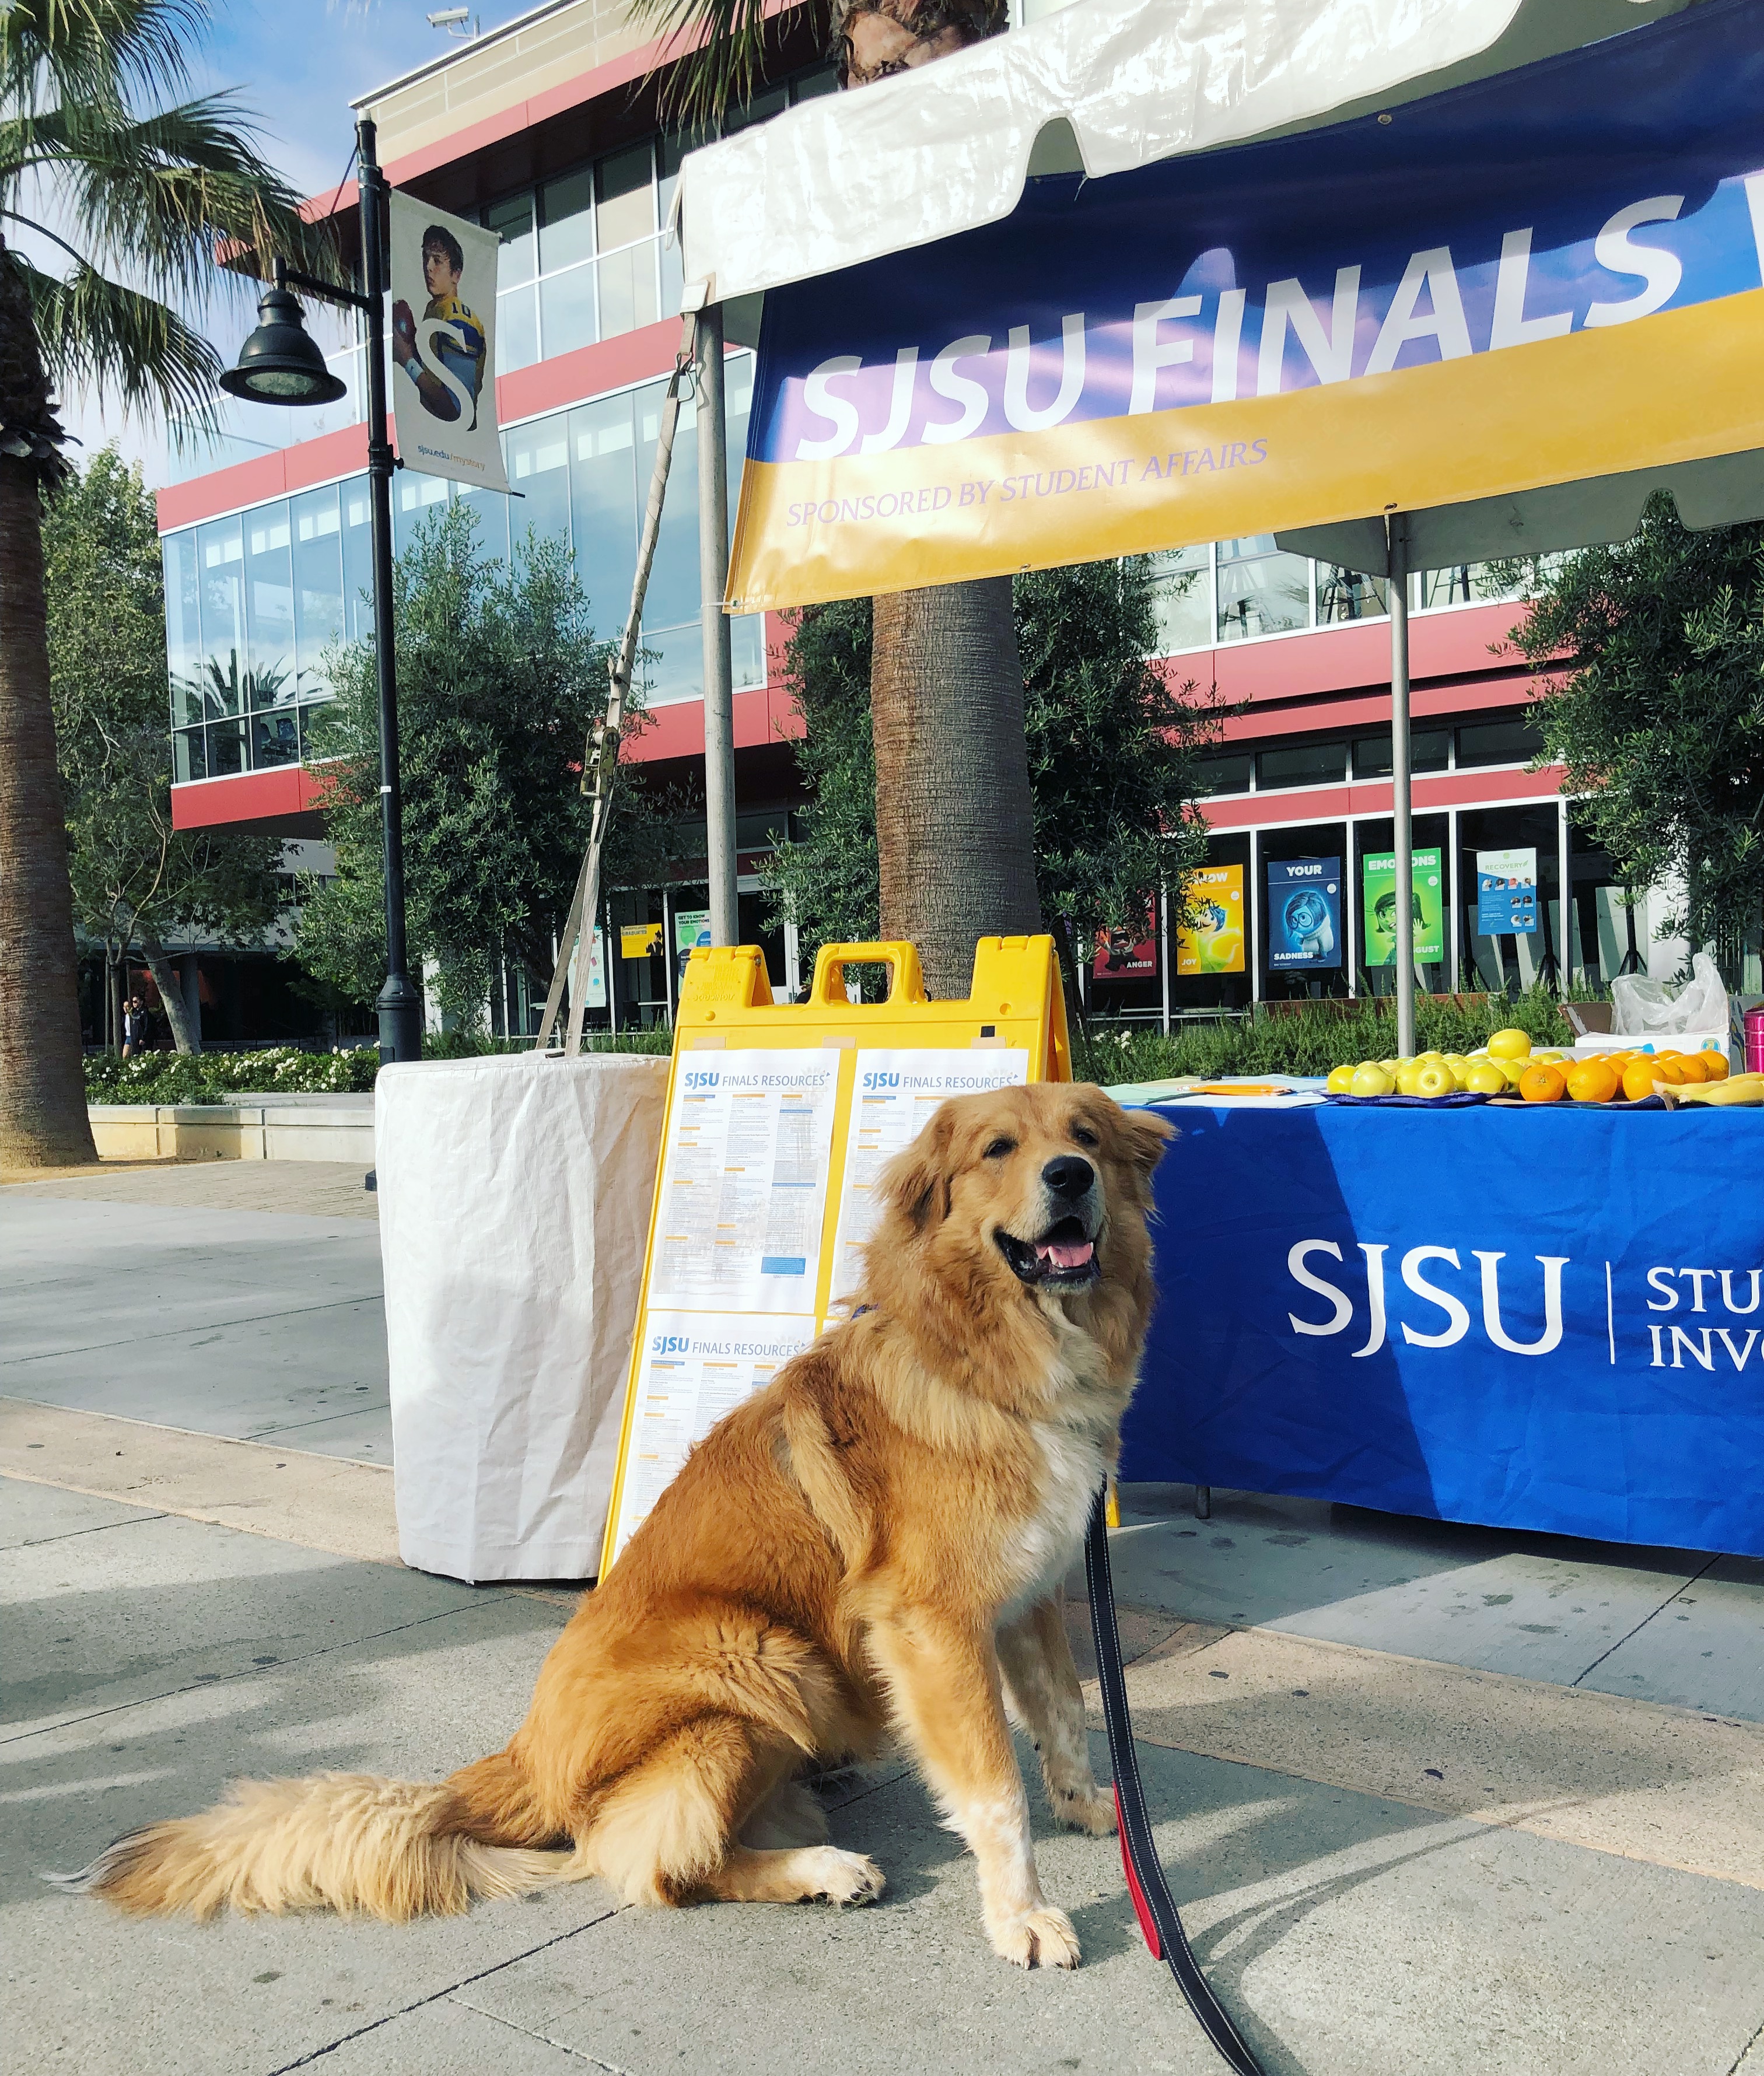 Adorable dog sits infront of booth. Banner over booth reads "Finals Table"